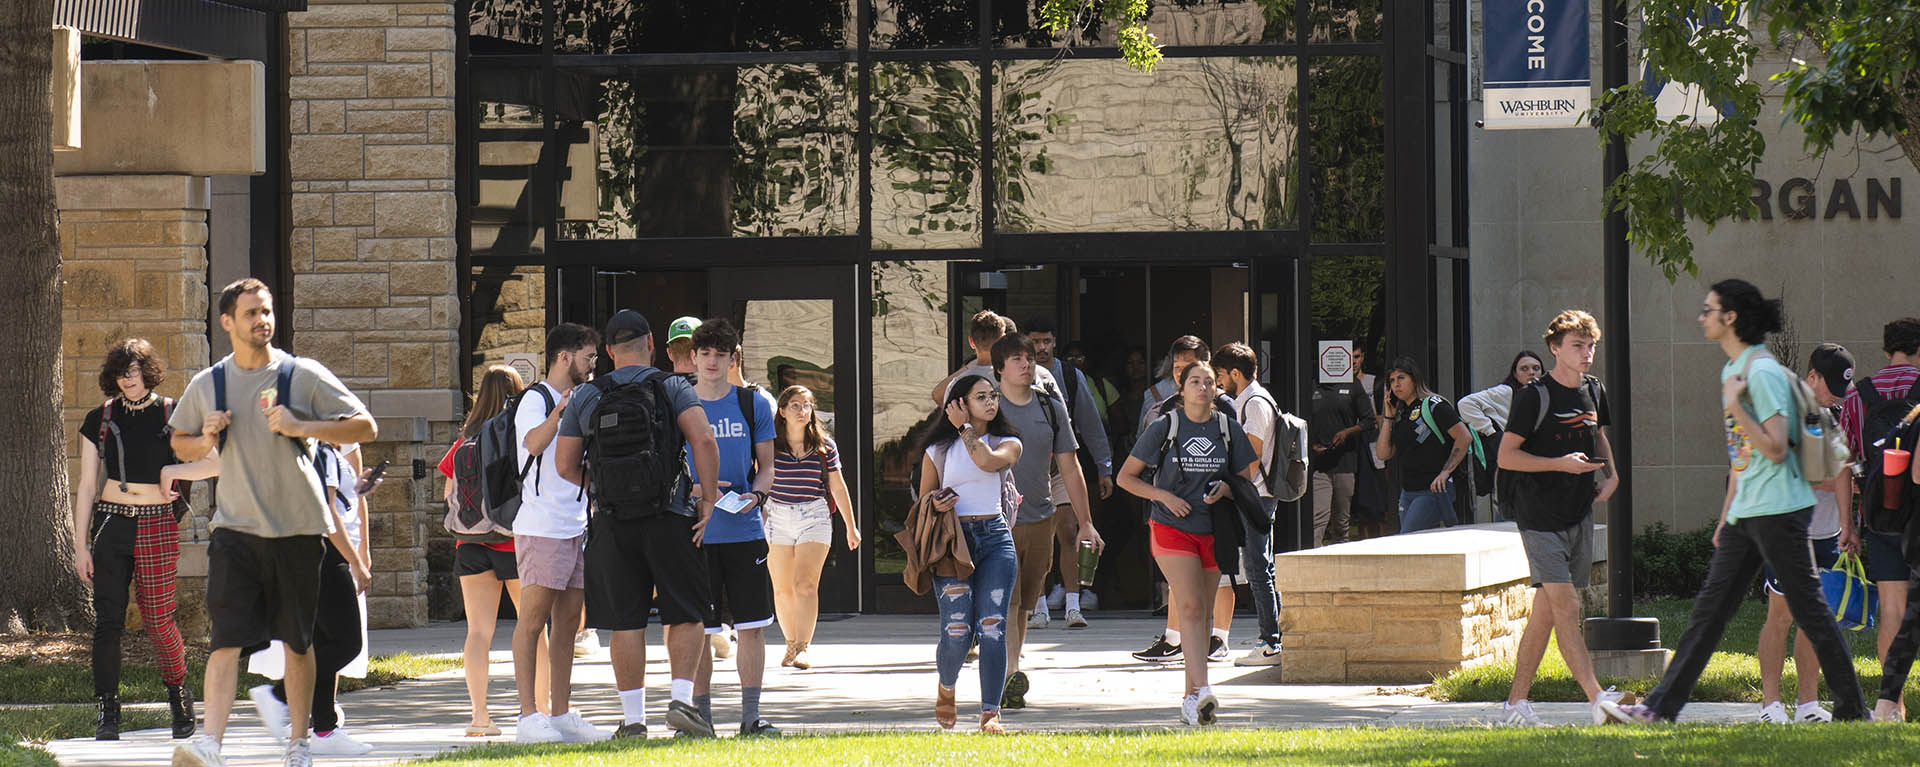 Students exit Morgan Hall on a spring day.